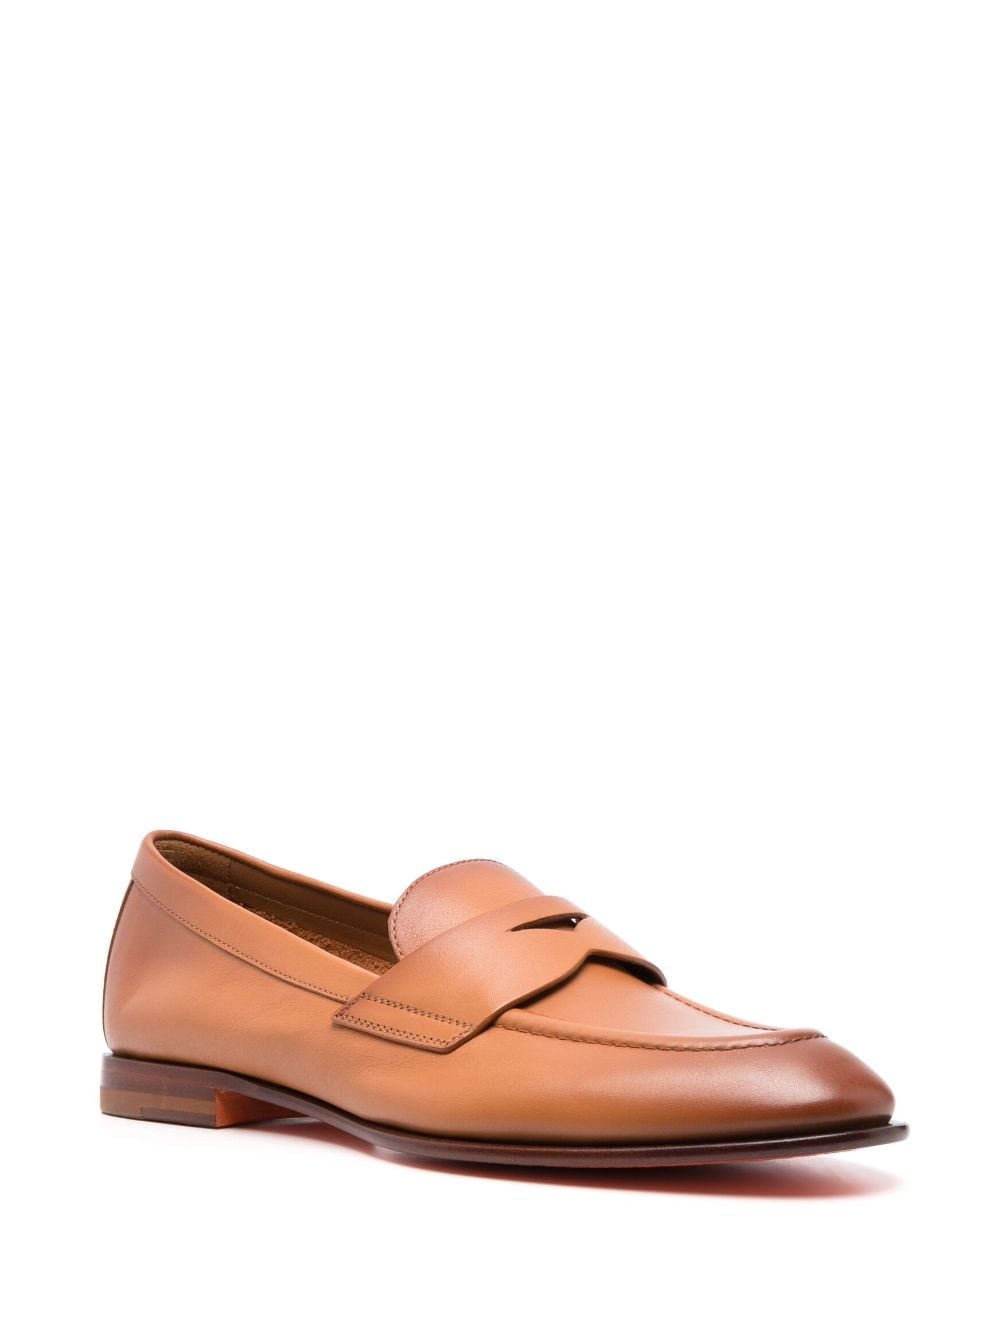 flat-sole leather loafers - 2